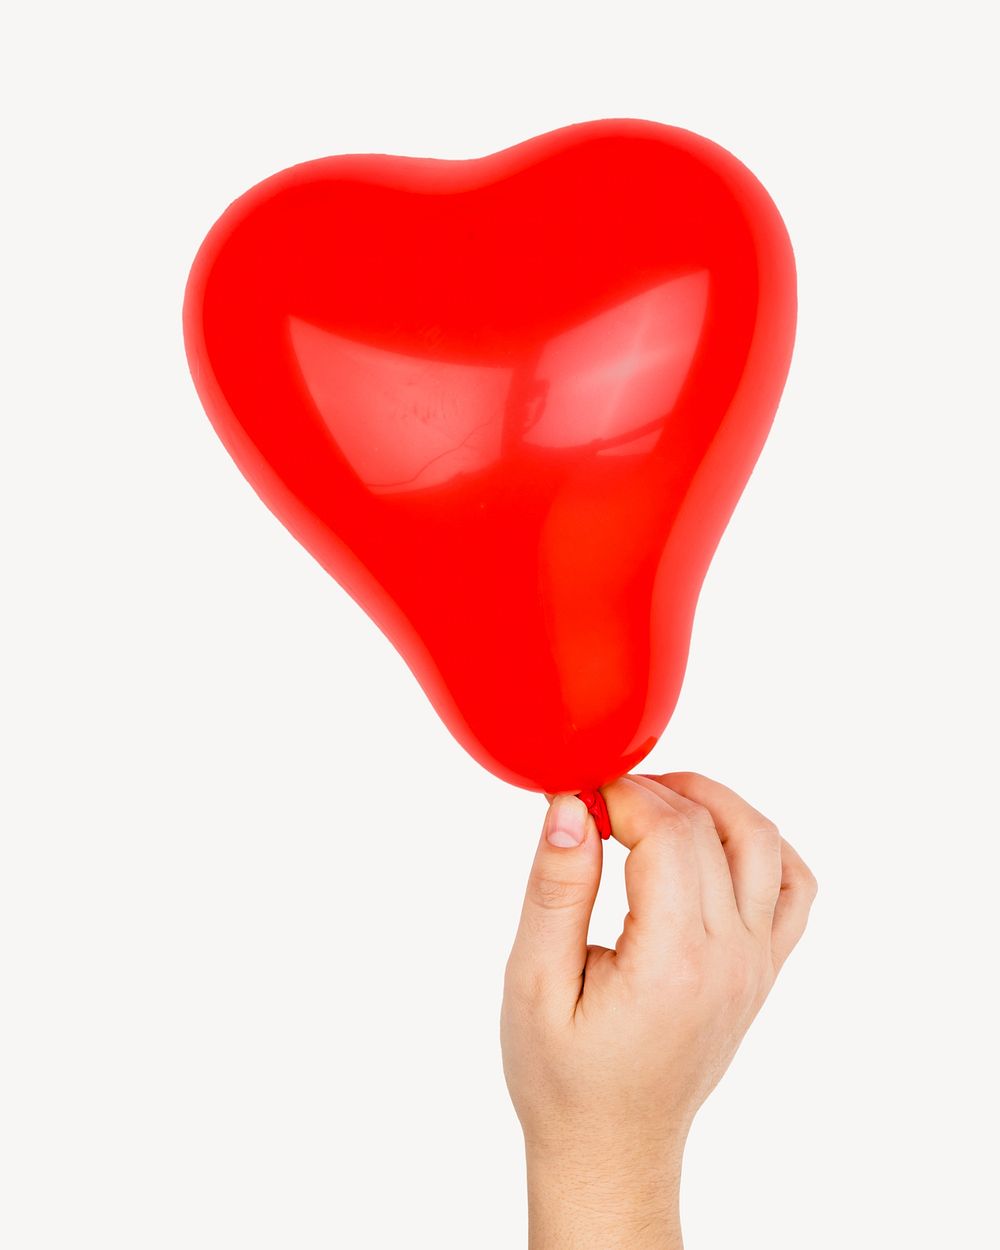 Heart shaped balloon isolated image on white